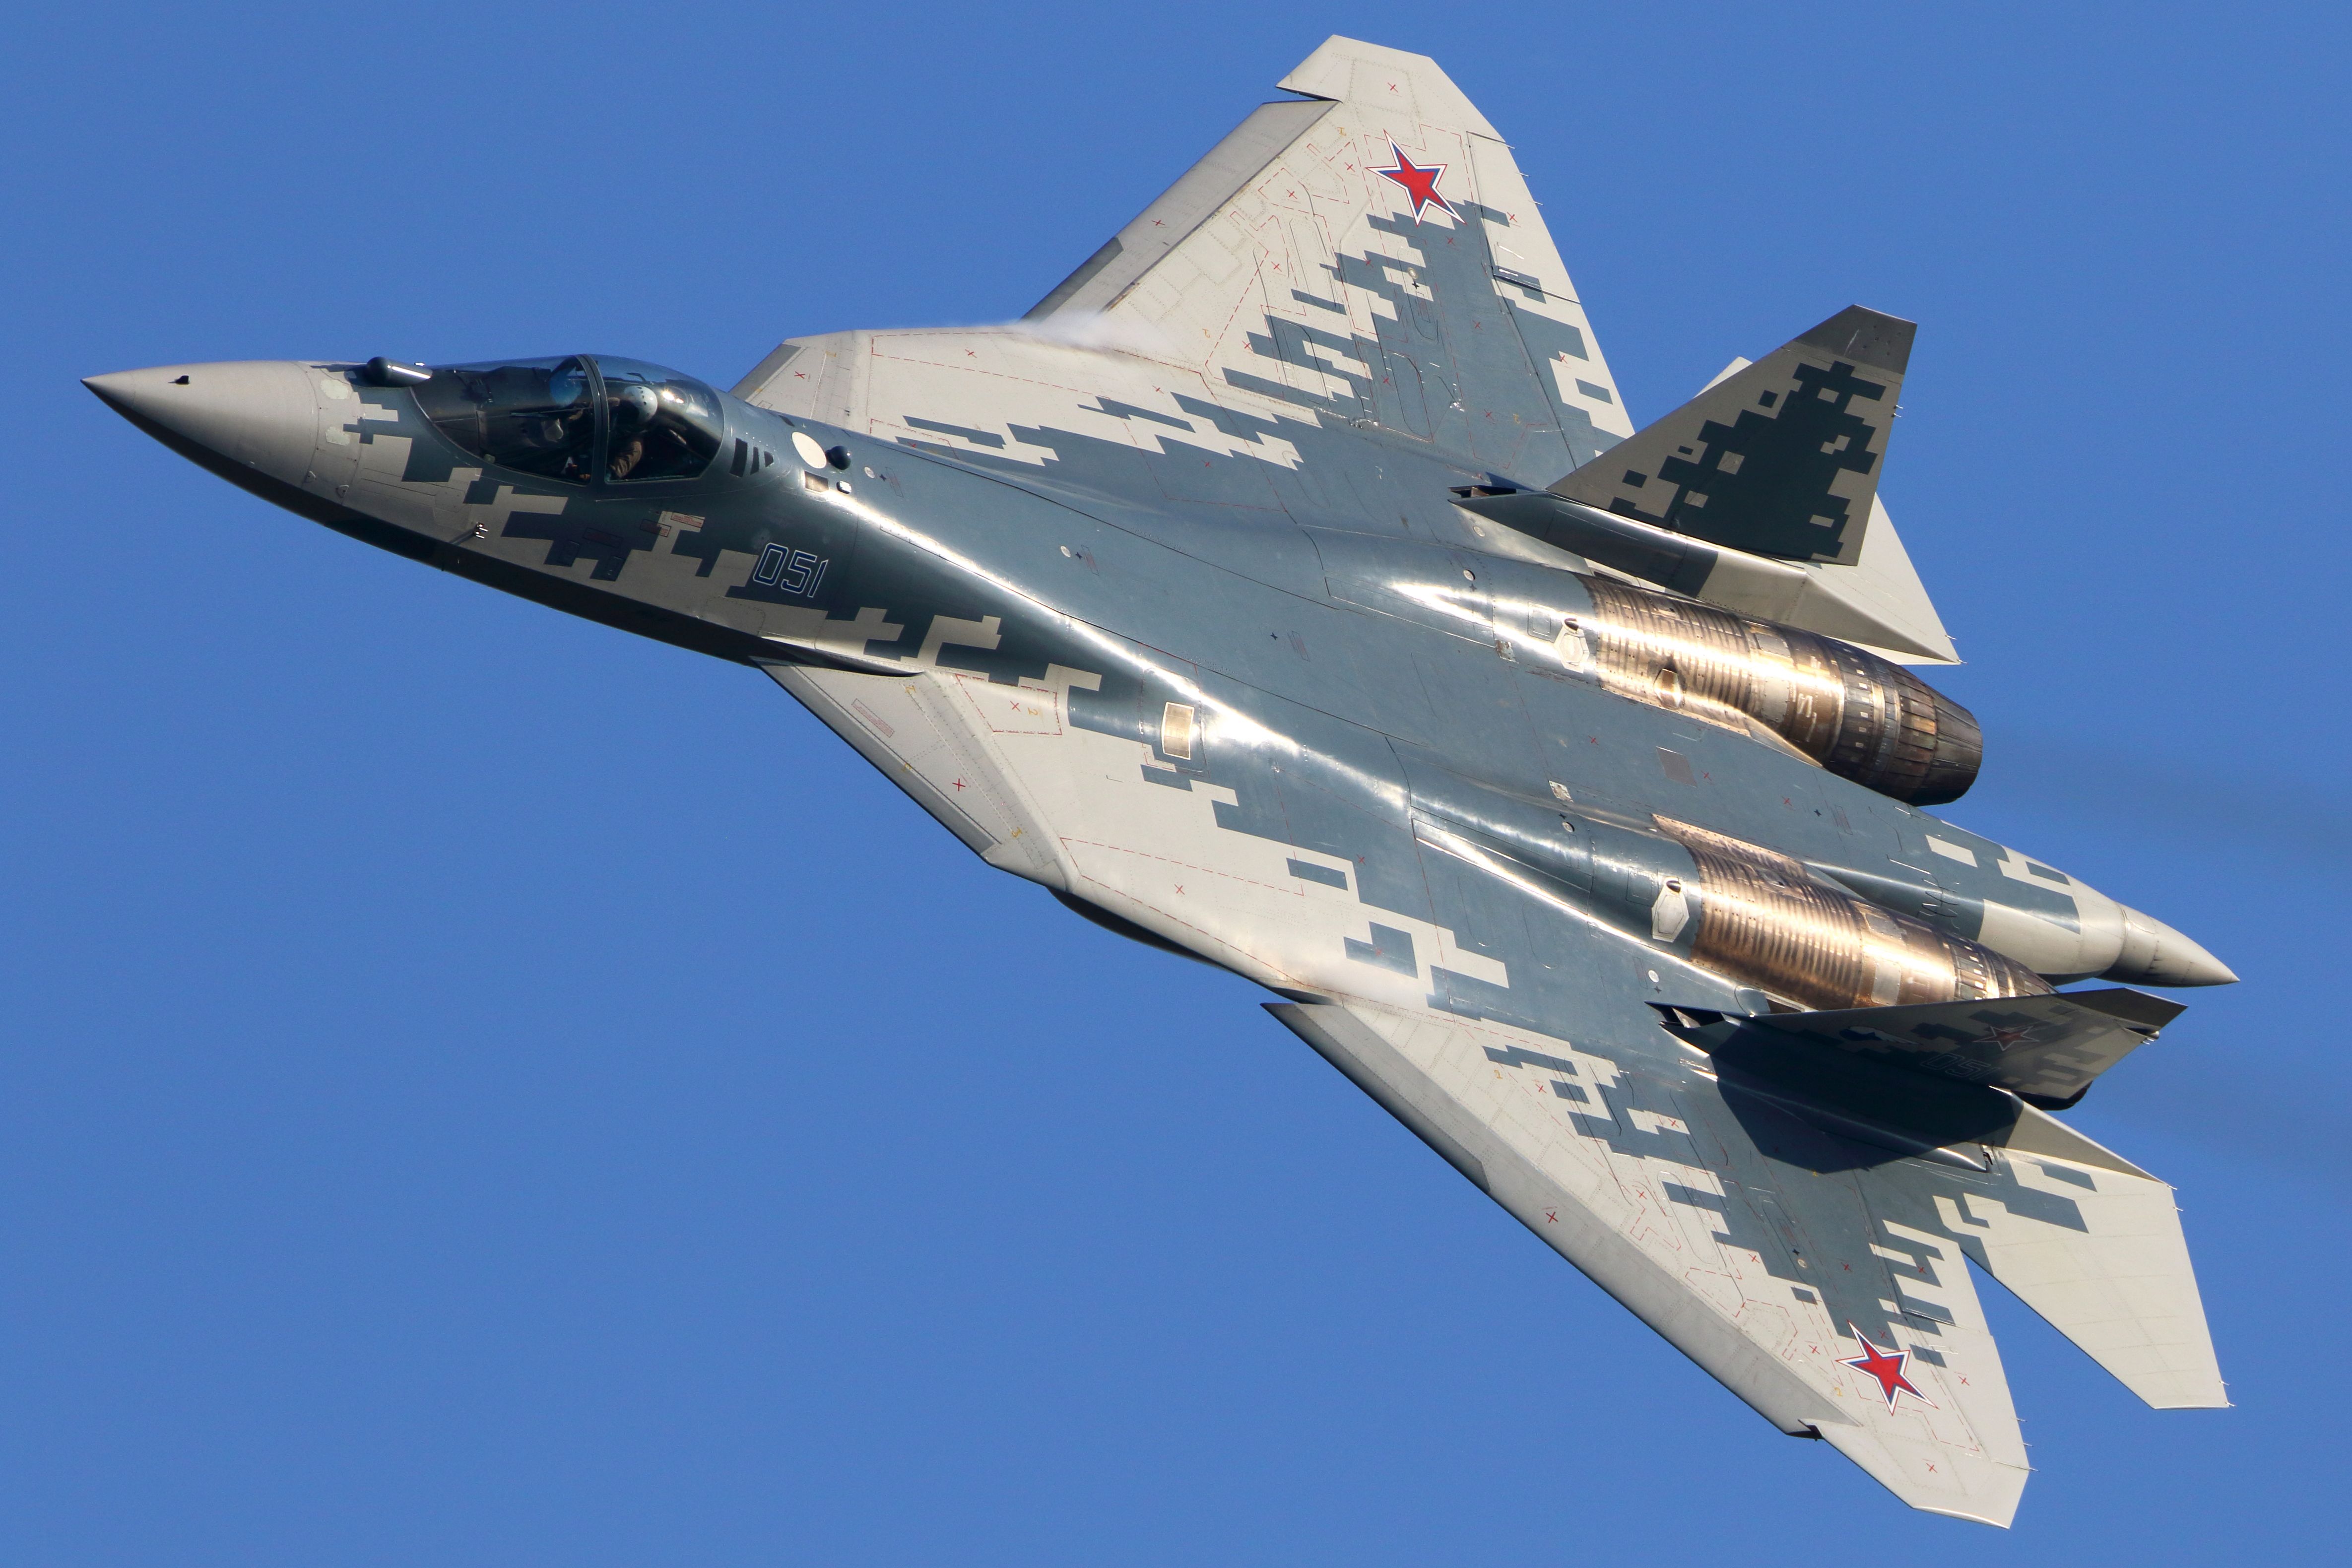 A Sukhoi Su-57 flying in the sky.